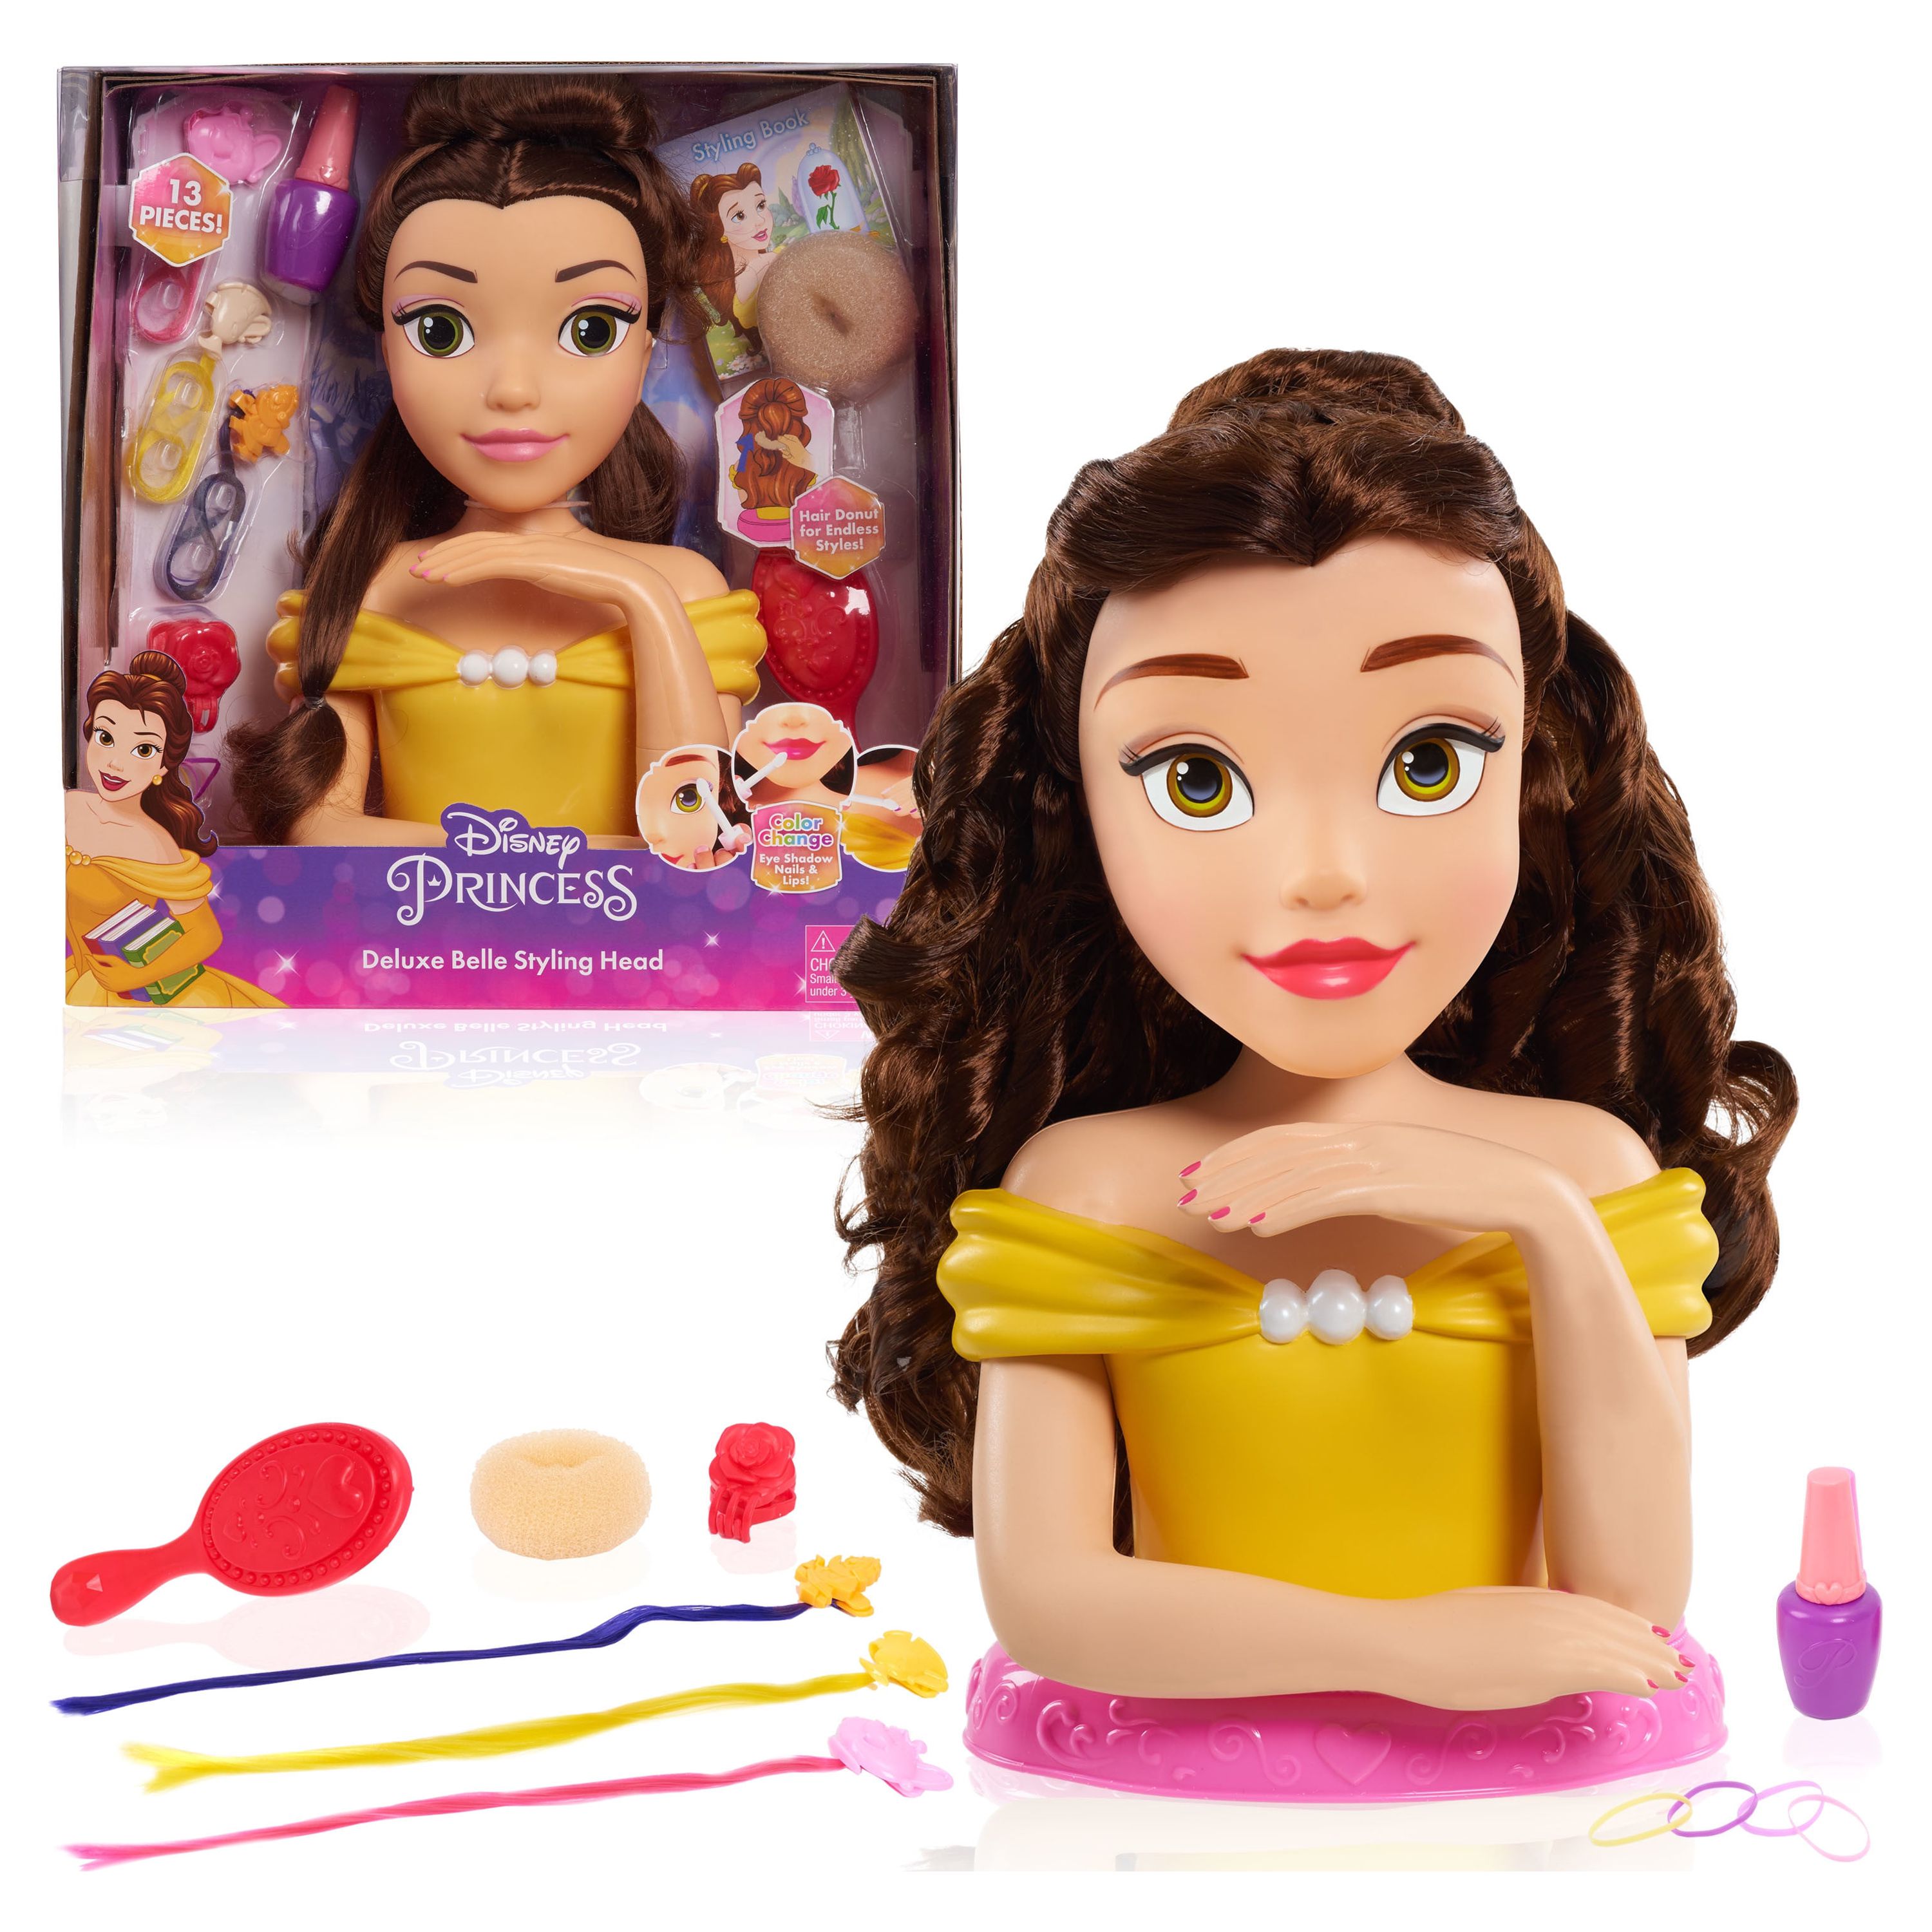 Disney Princess Deluxe Belle Styling Head, 13-pieces, Officially Licensed Kids Toys for Ages 3 Up, Gifts and Presents - image 1 of 6